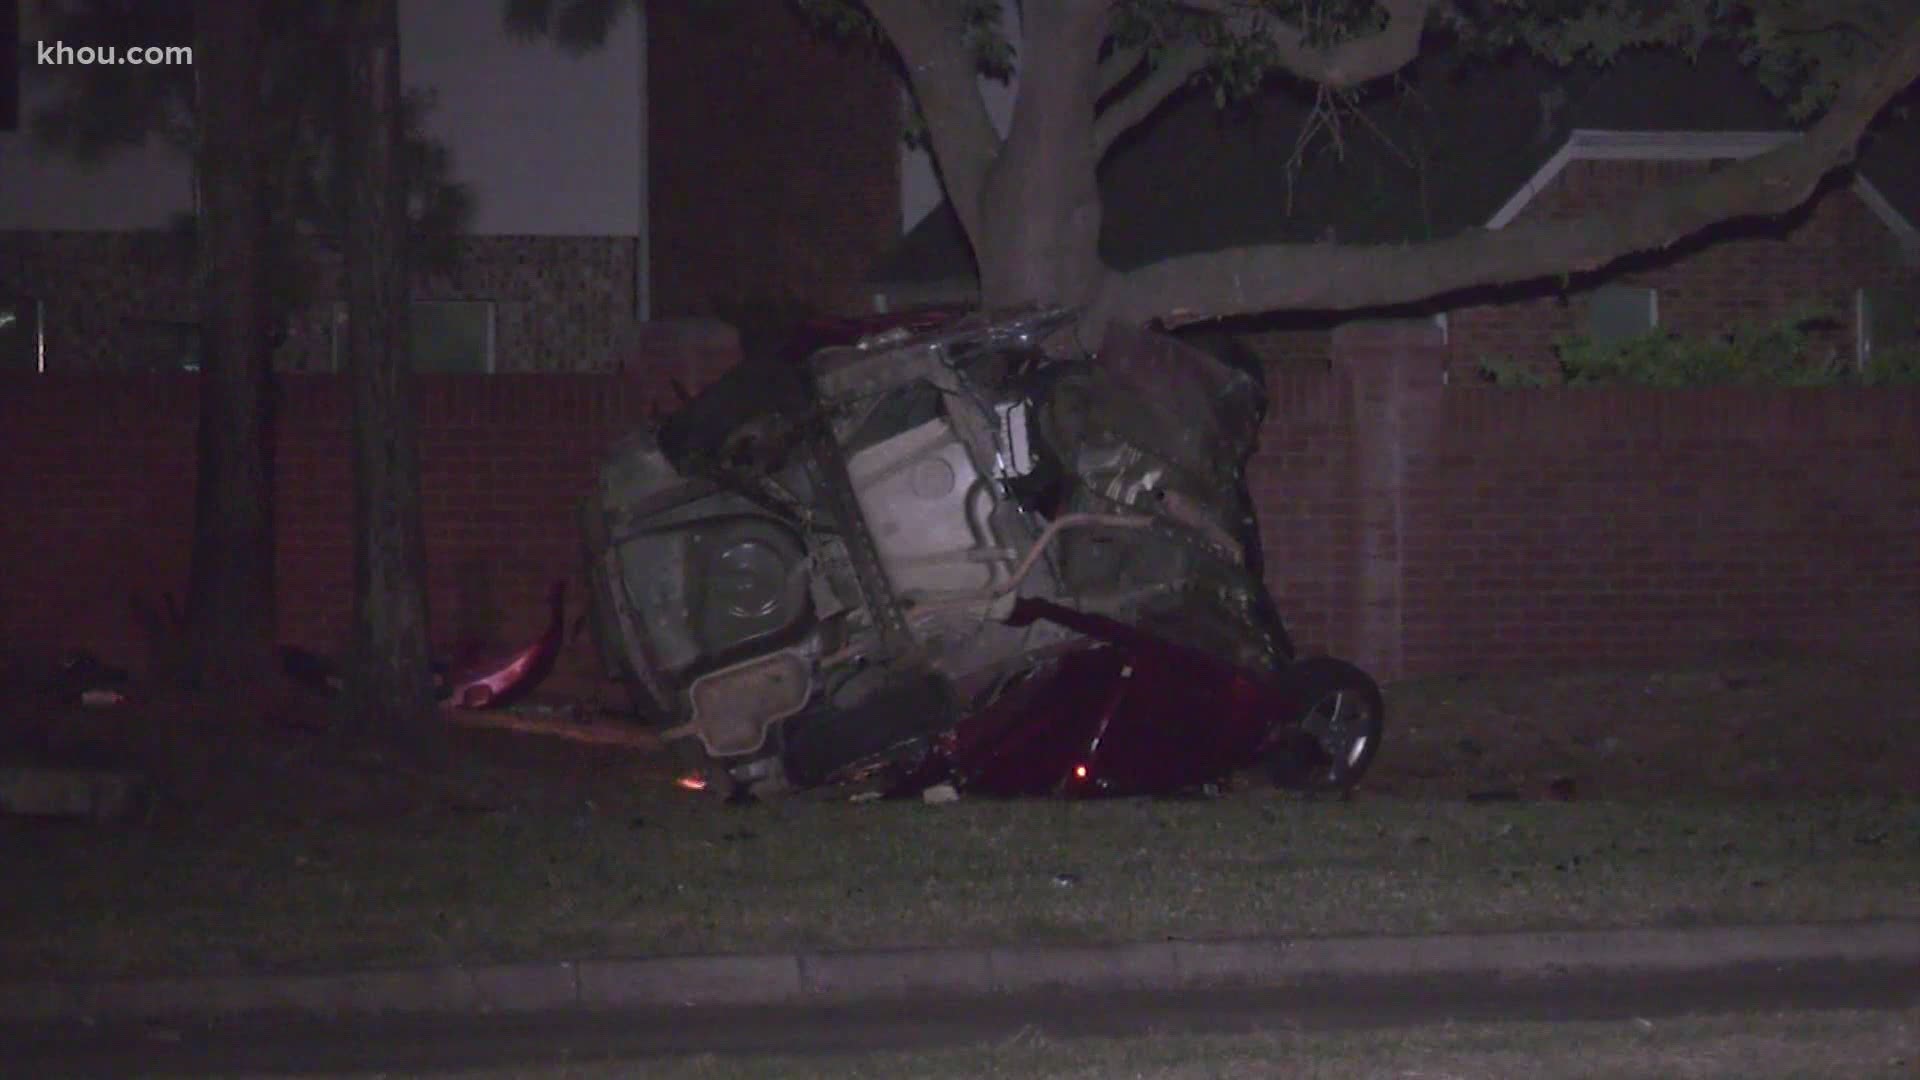 Deputies near Houston say the driver also crashed into a utility pole and tree - the innocent driver was not hurt.